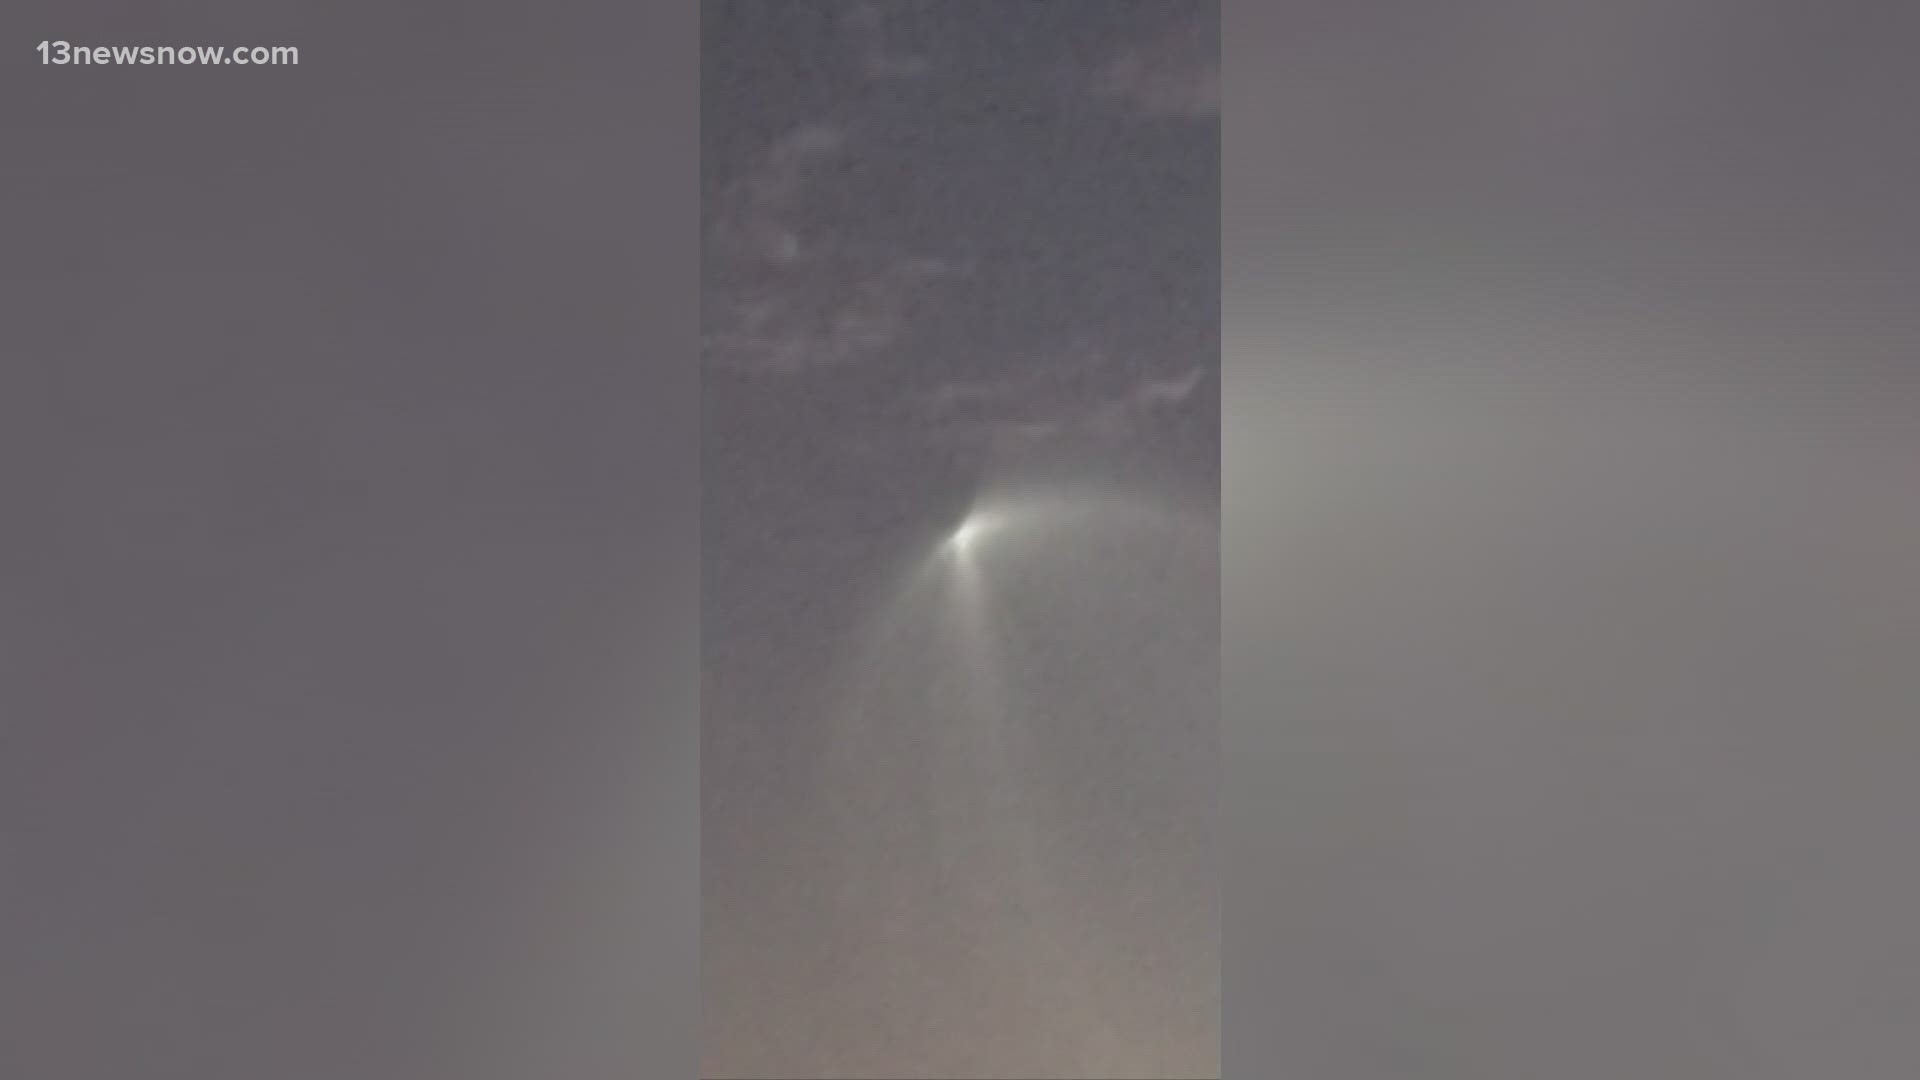 Several people reached out to 13News Now asking about a strange lighted object that light up the clouds and slowly moved across the sky as the sun set around 5:30.